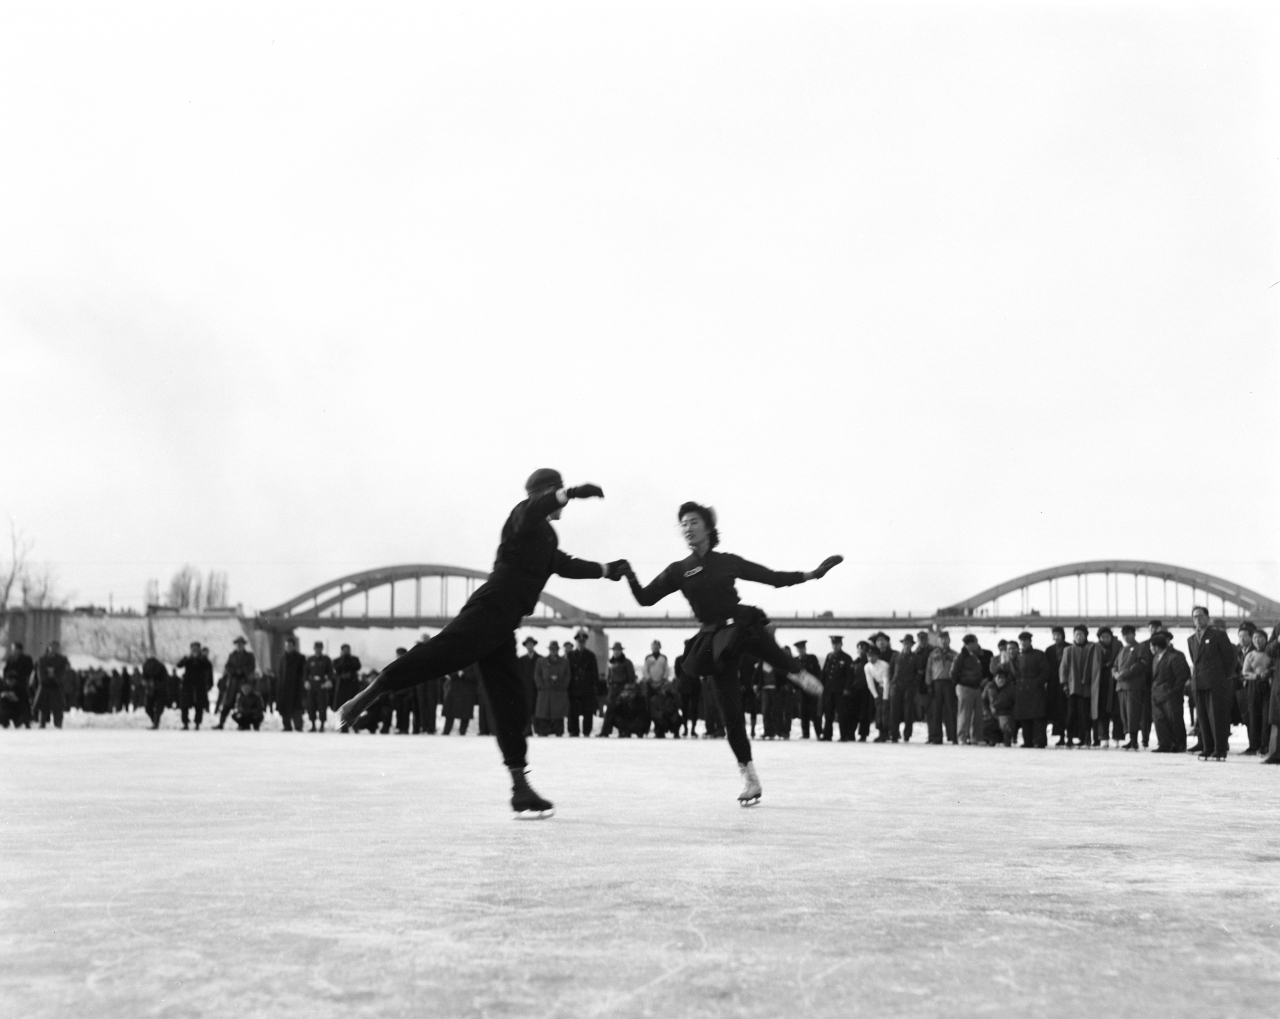 Figure skaters perform as a duo as spectators look on, during a 1956 winter sports event held in the middle of the frozen Han River. (National Archives of Korea)